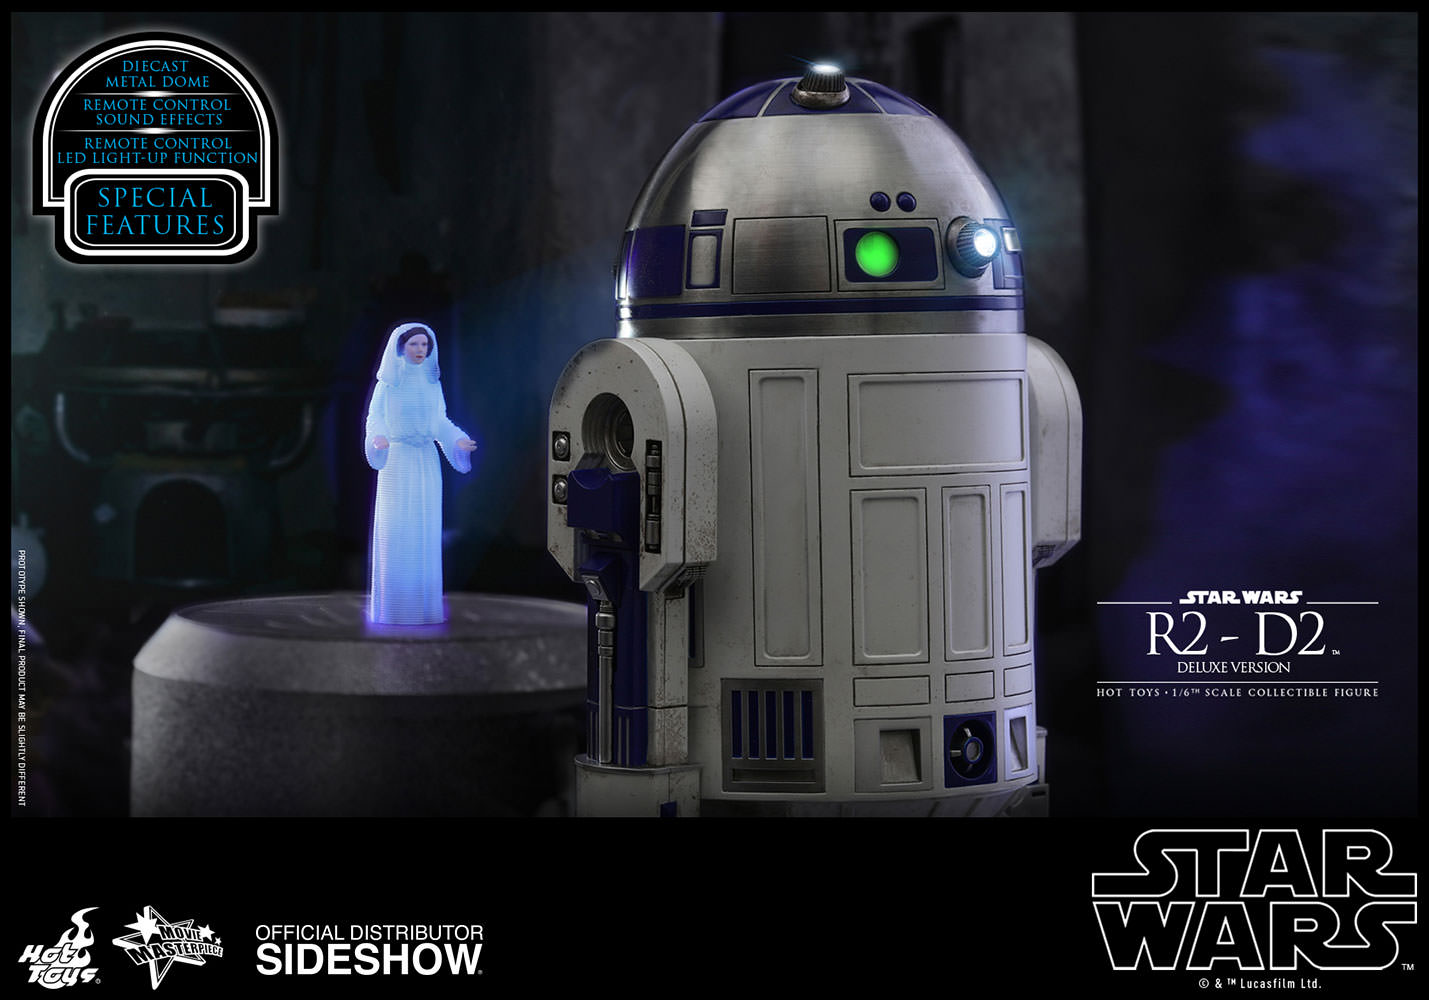 R2-D2 Deluxe Version  Sixth Scale Figure by Hot Toys Movie Masterpiece Series 